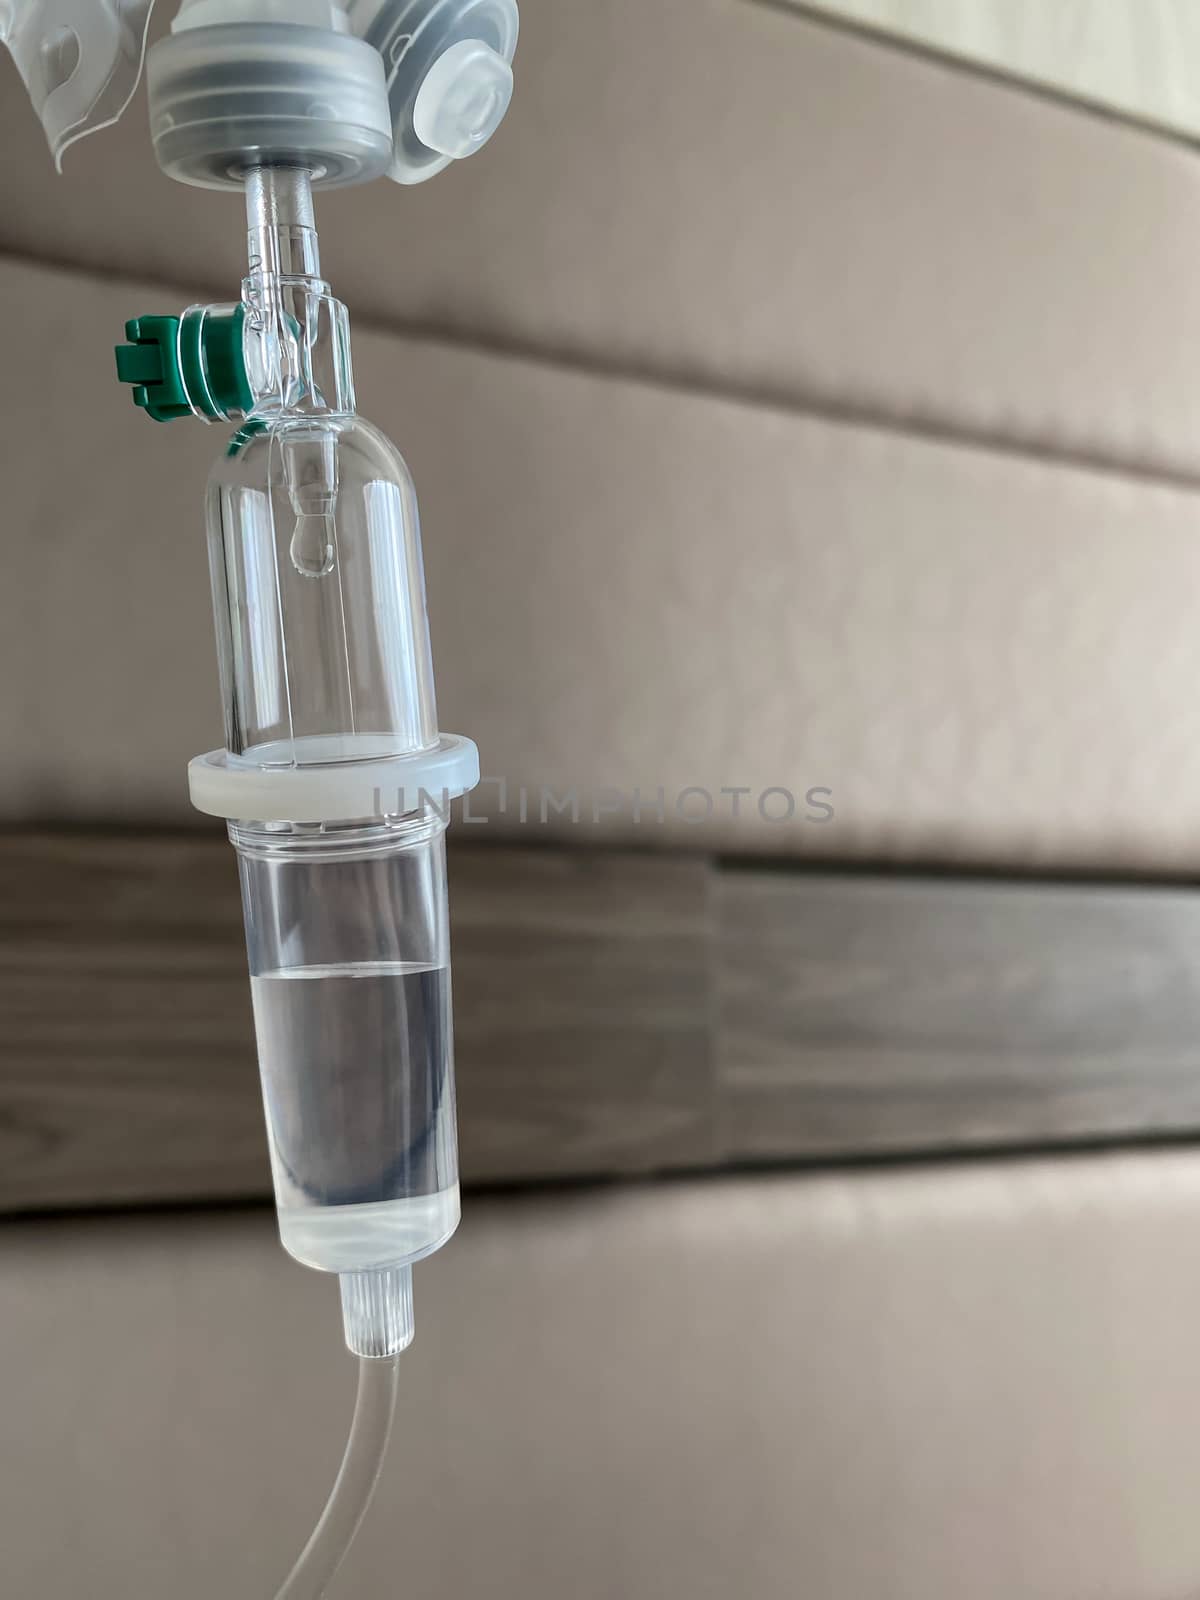 saline solution drip for treatment patient in hospital by happycreator